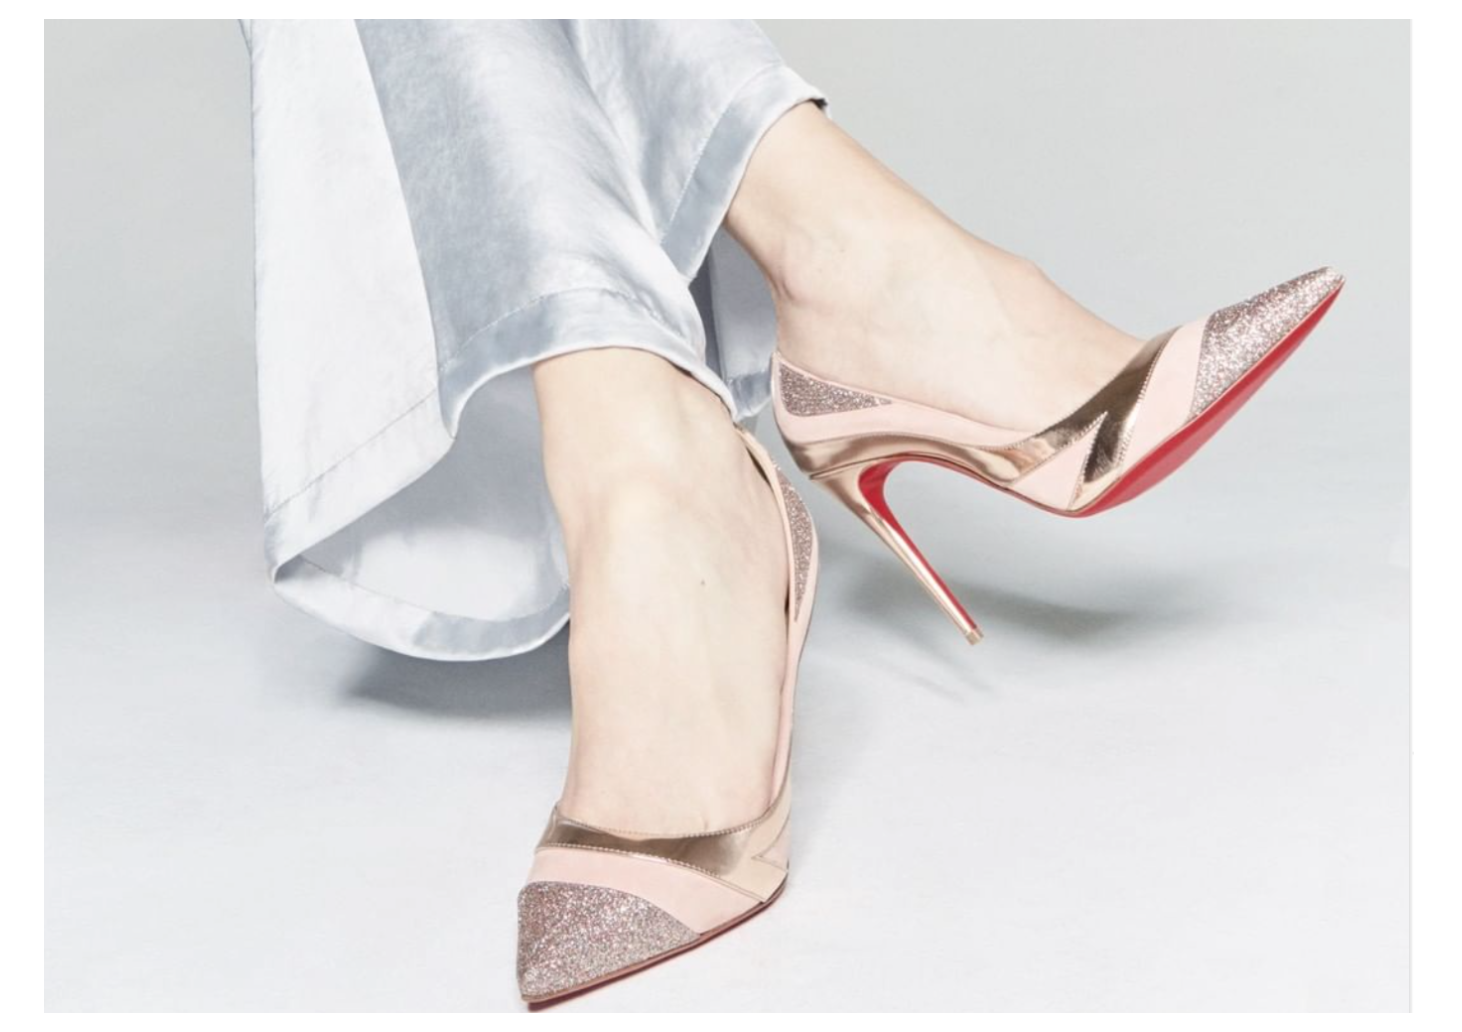 Louboutin faces setback in EU legal battle over red soles - BBC News